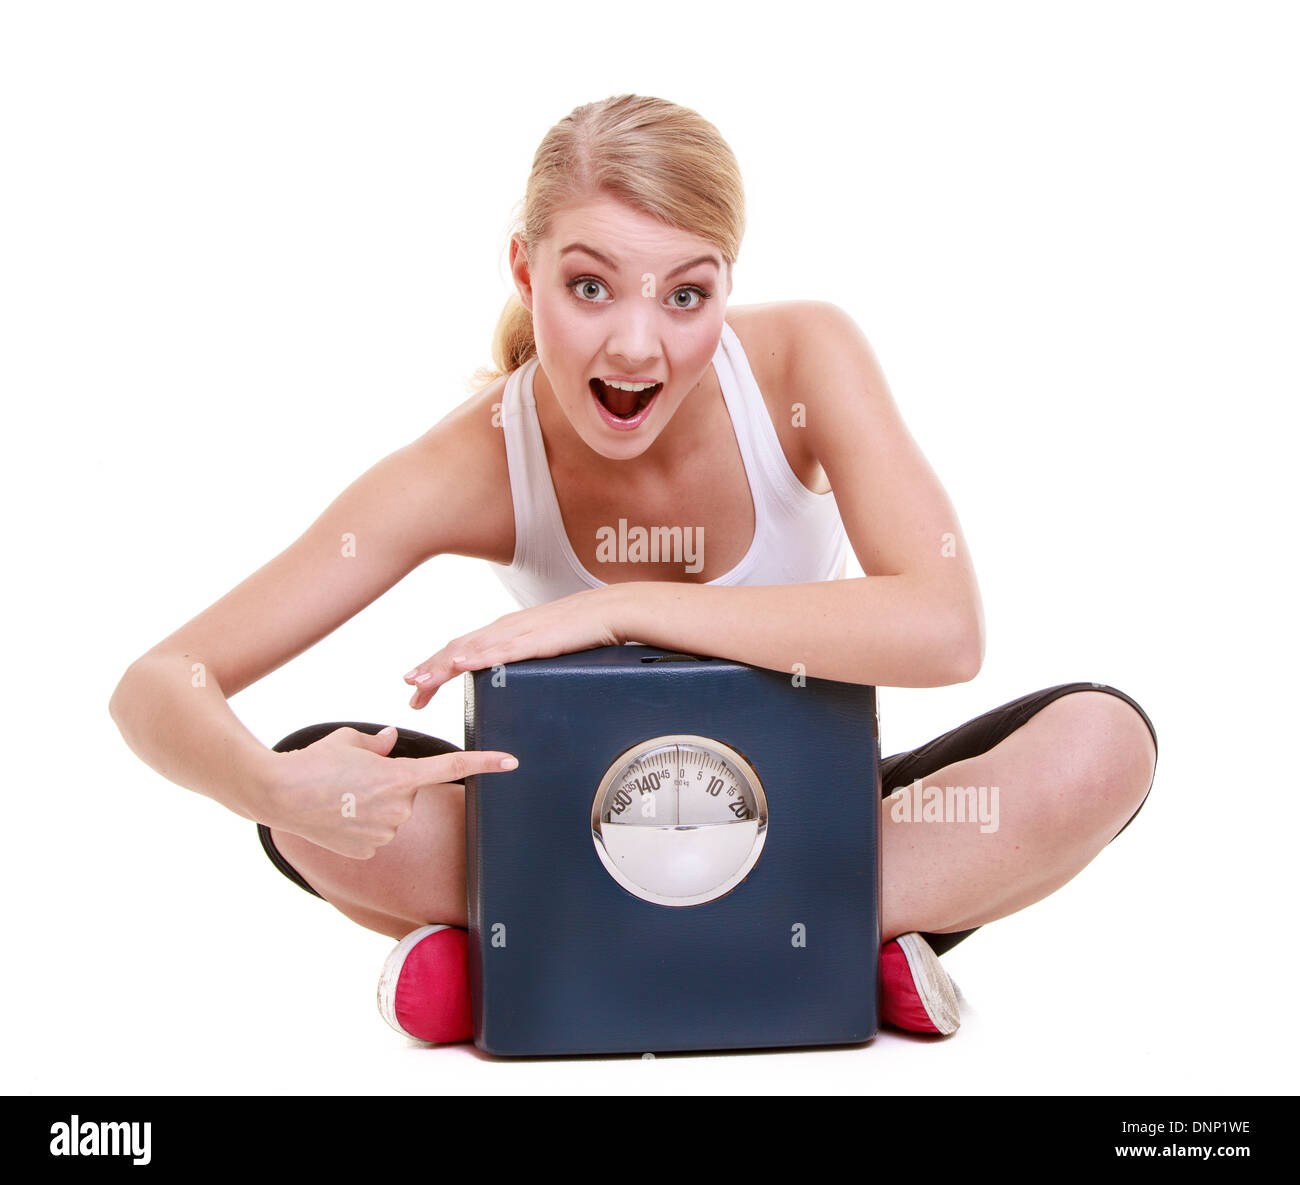 https://c8.alamy.com/comp/DNP1WE/fit-fitness-woman-showing-weight-scale-happy-blonde-girl-celebrating-DNP1WE.jpg